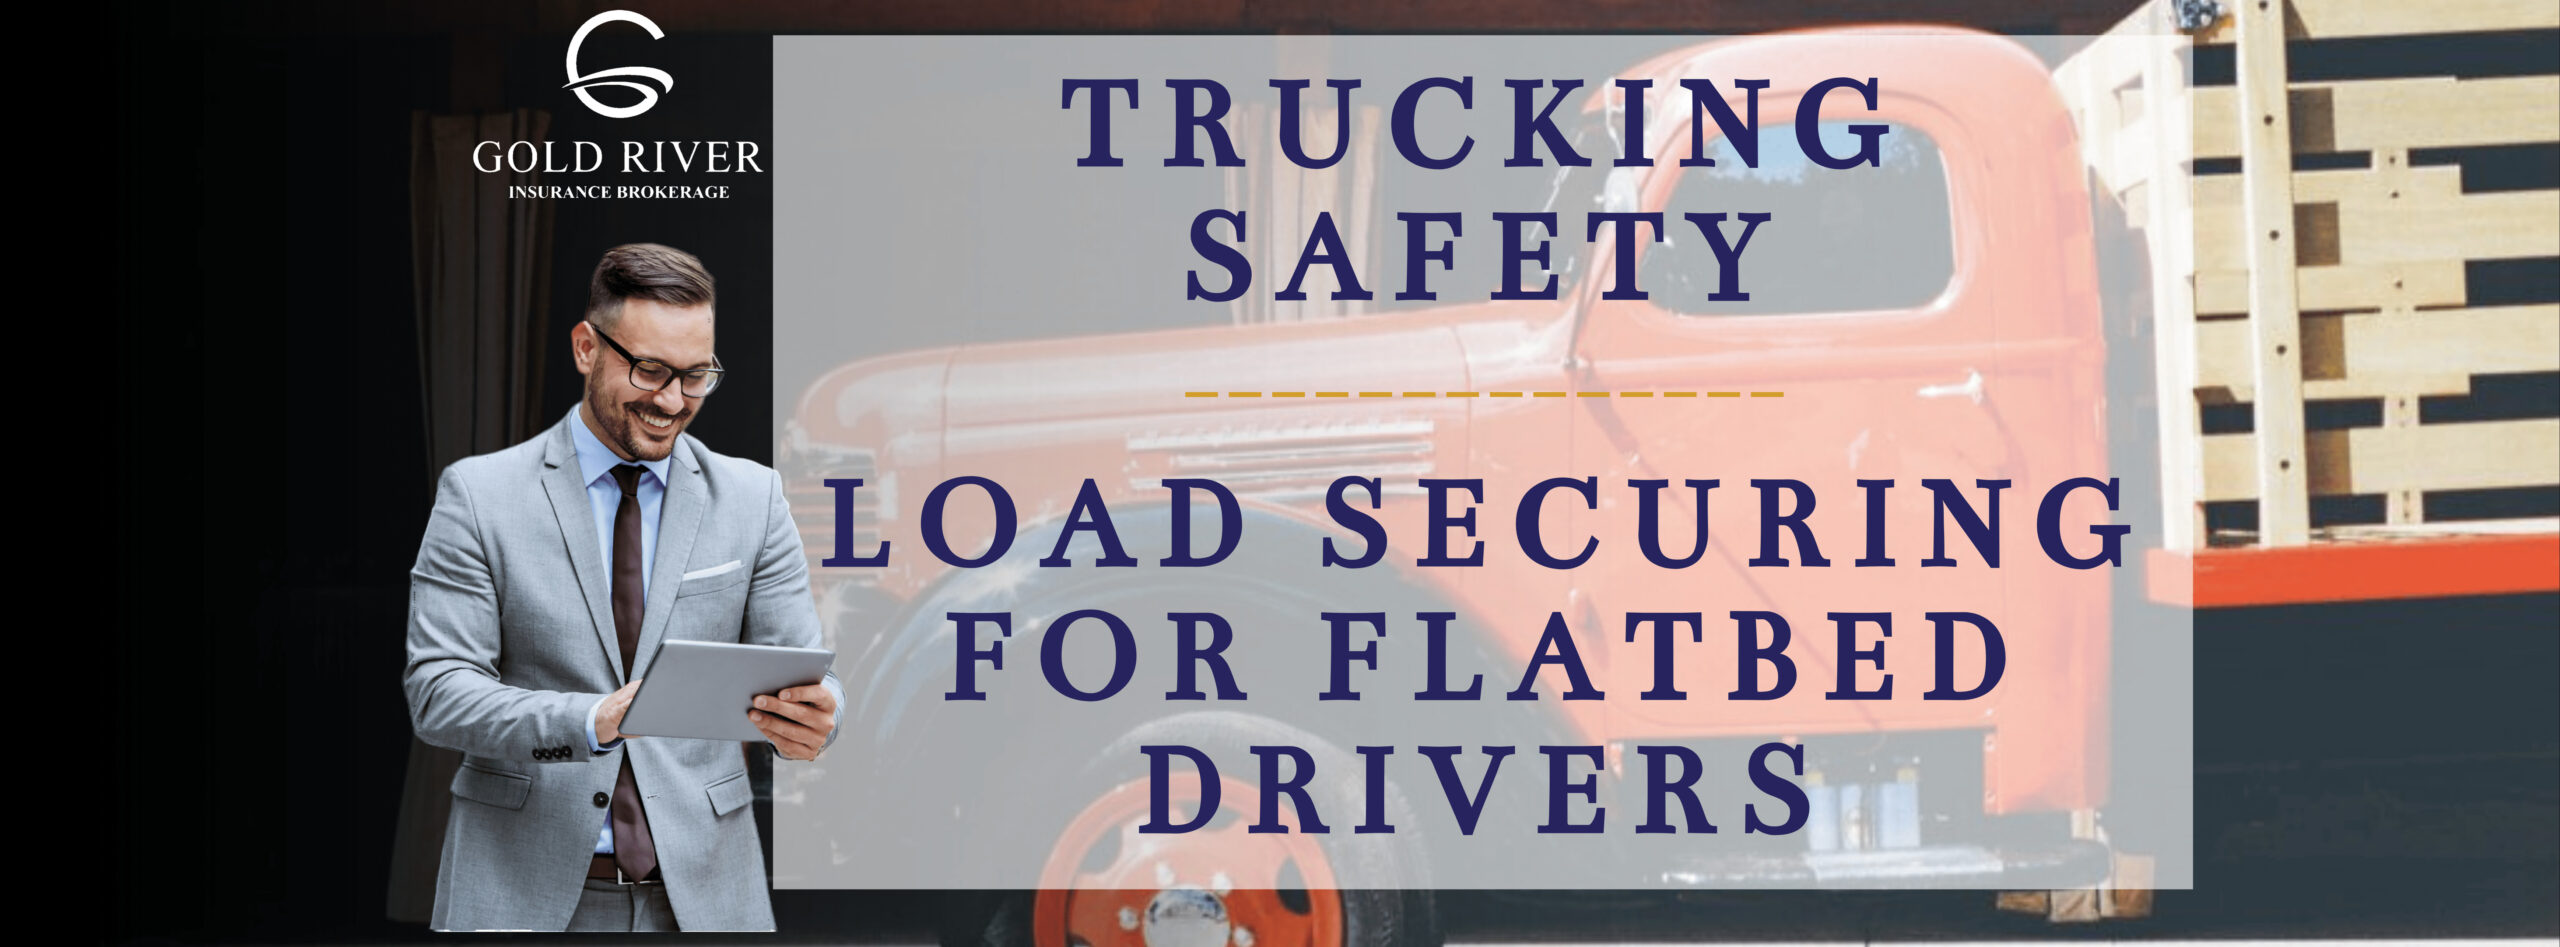 Trucking Safety - Flat Bed Drivers